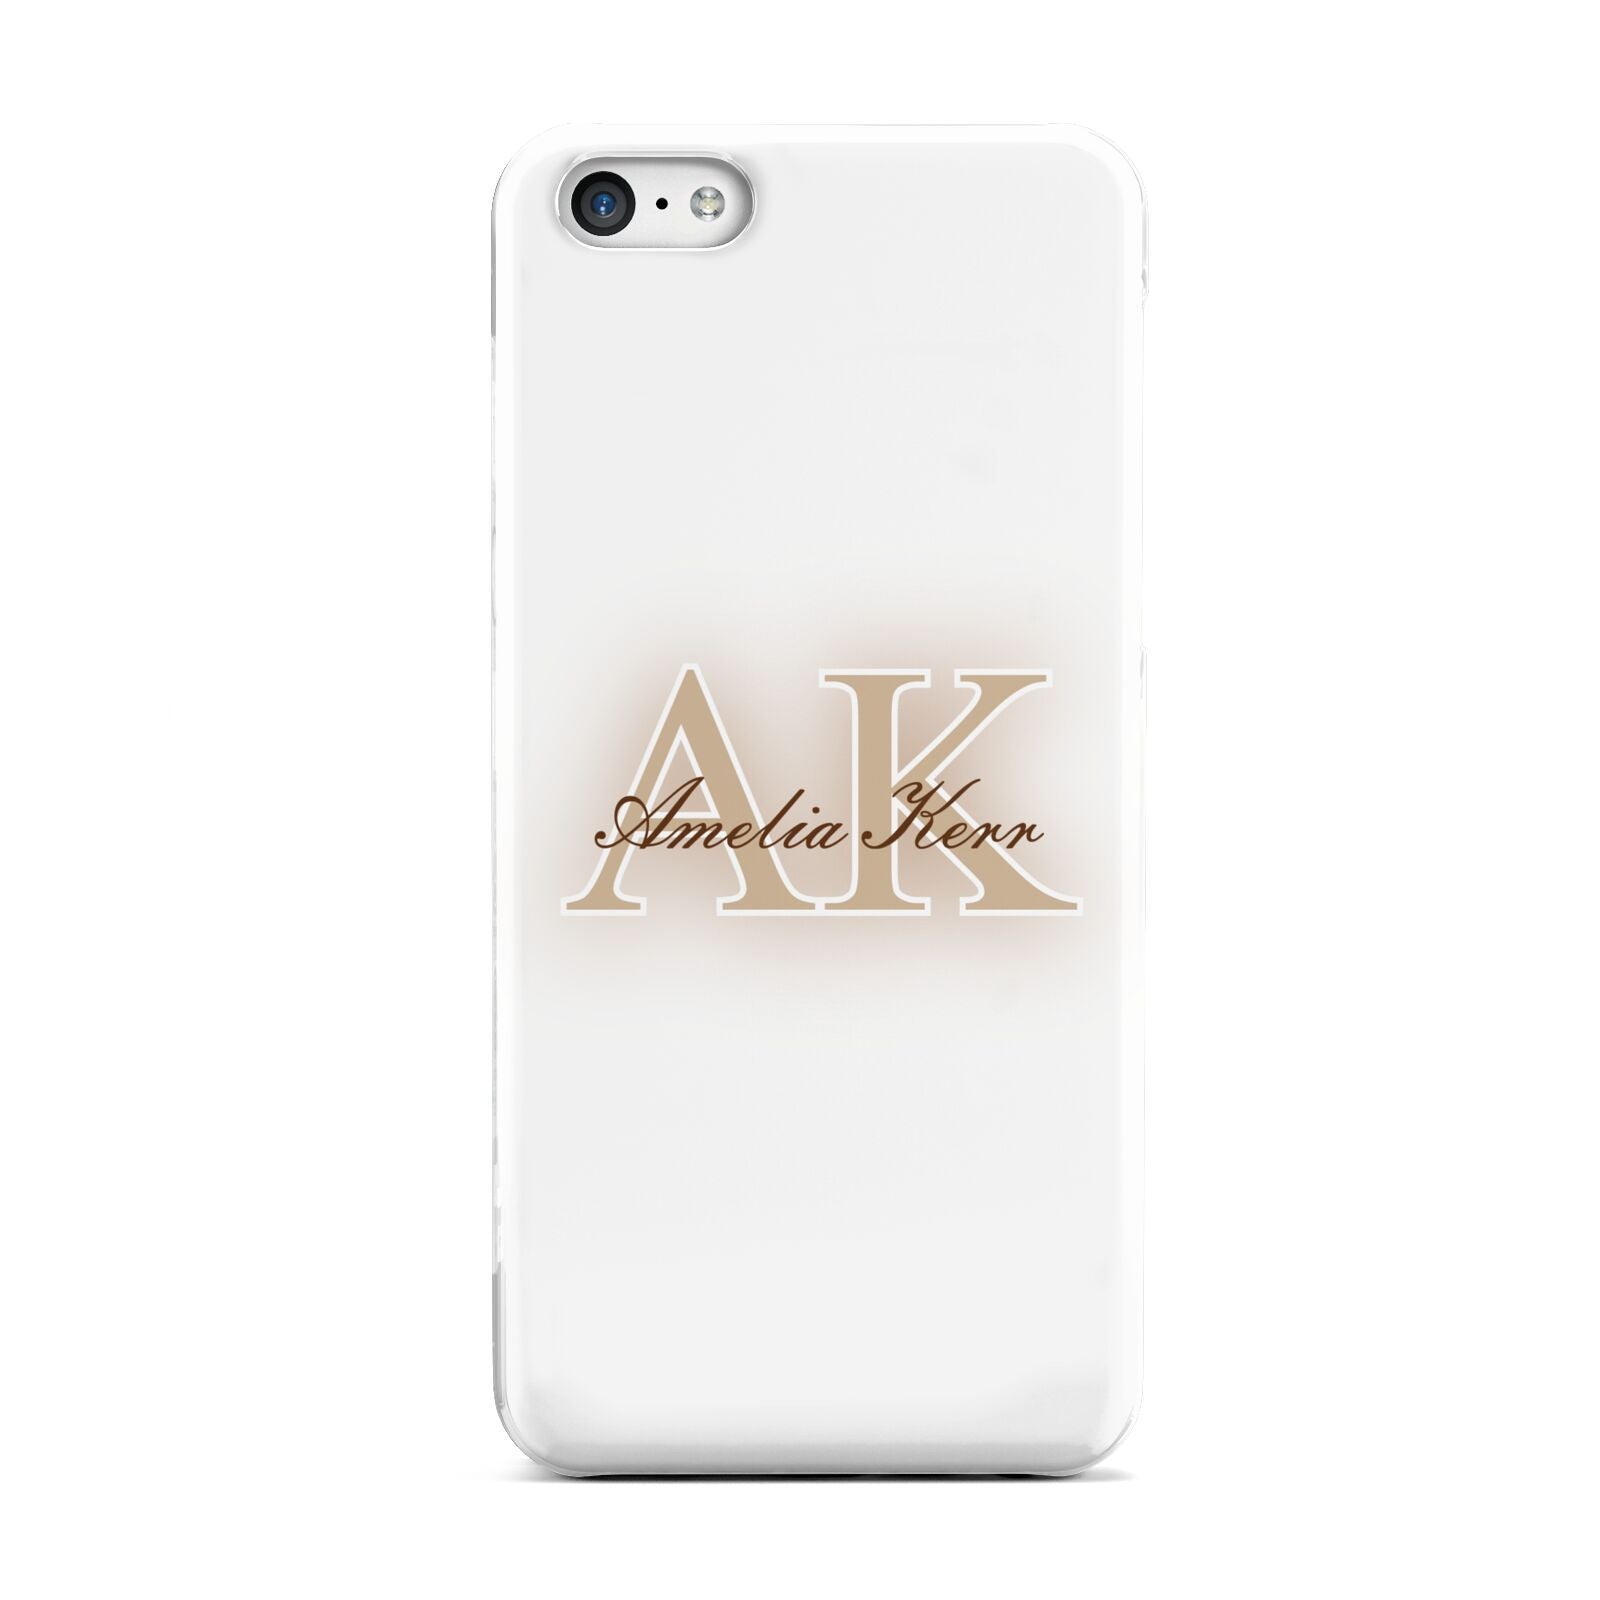 Shadow Initial Personalised Apple iPhone 5c Case